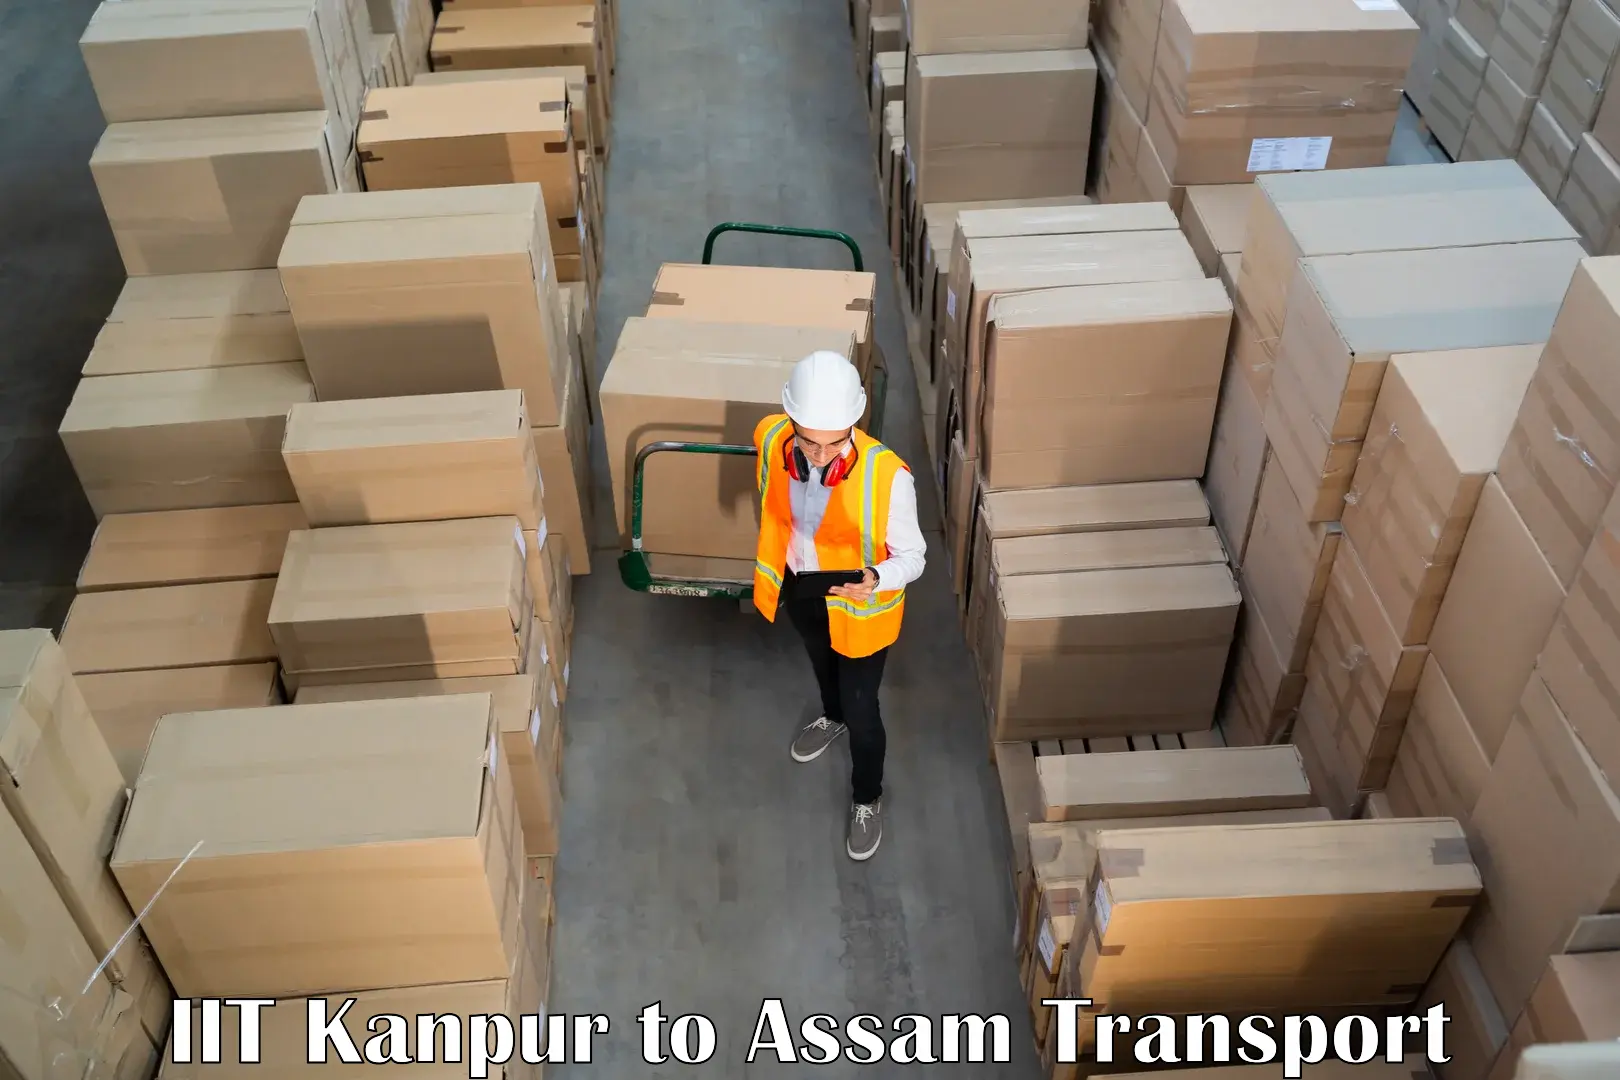 Part load transport service in India IIT Kanpur to IIIT Guwahati